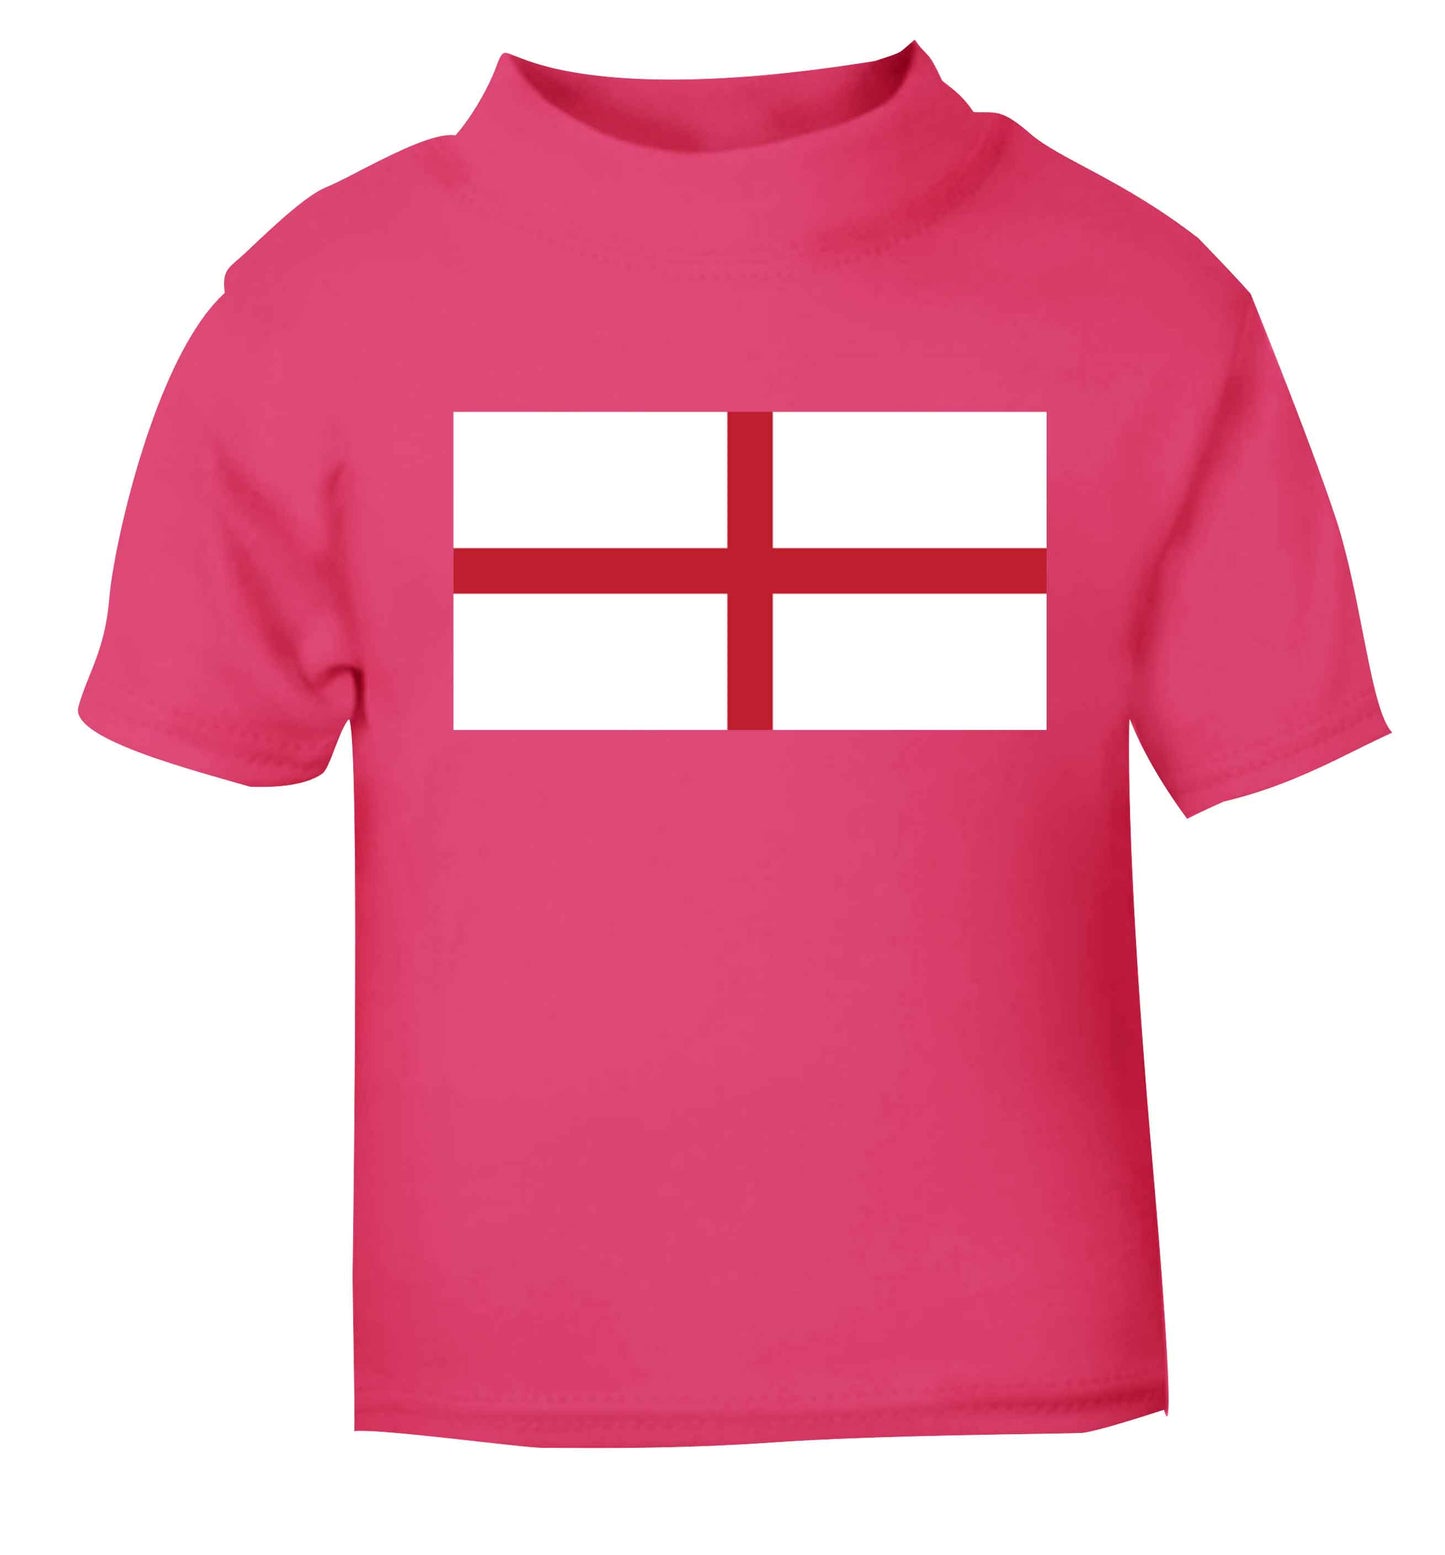 England Flag pink baby toddler Tshirt 2 Years